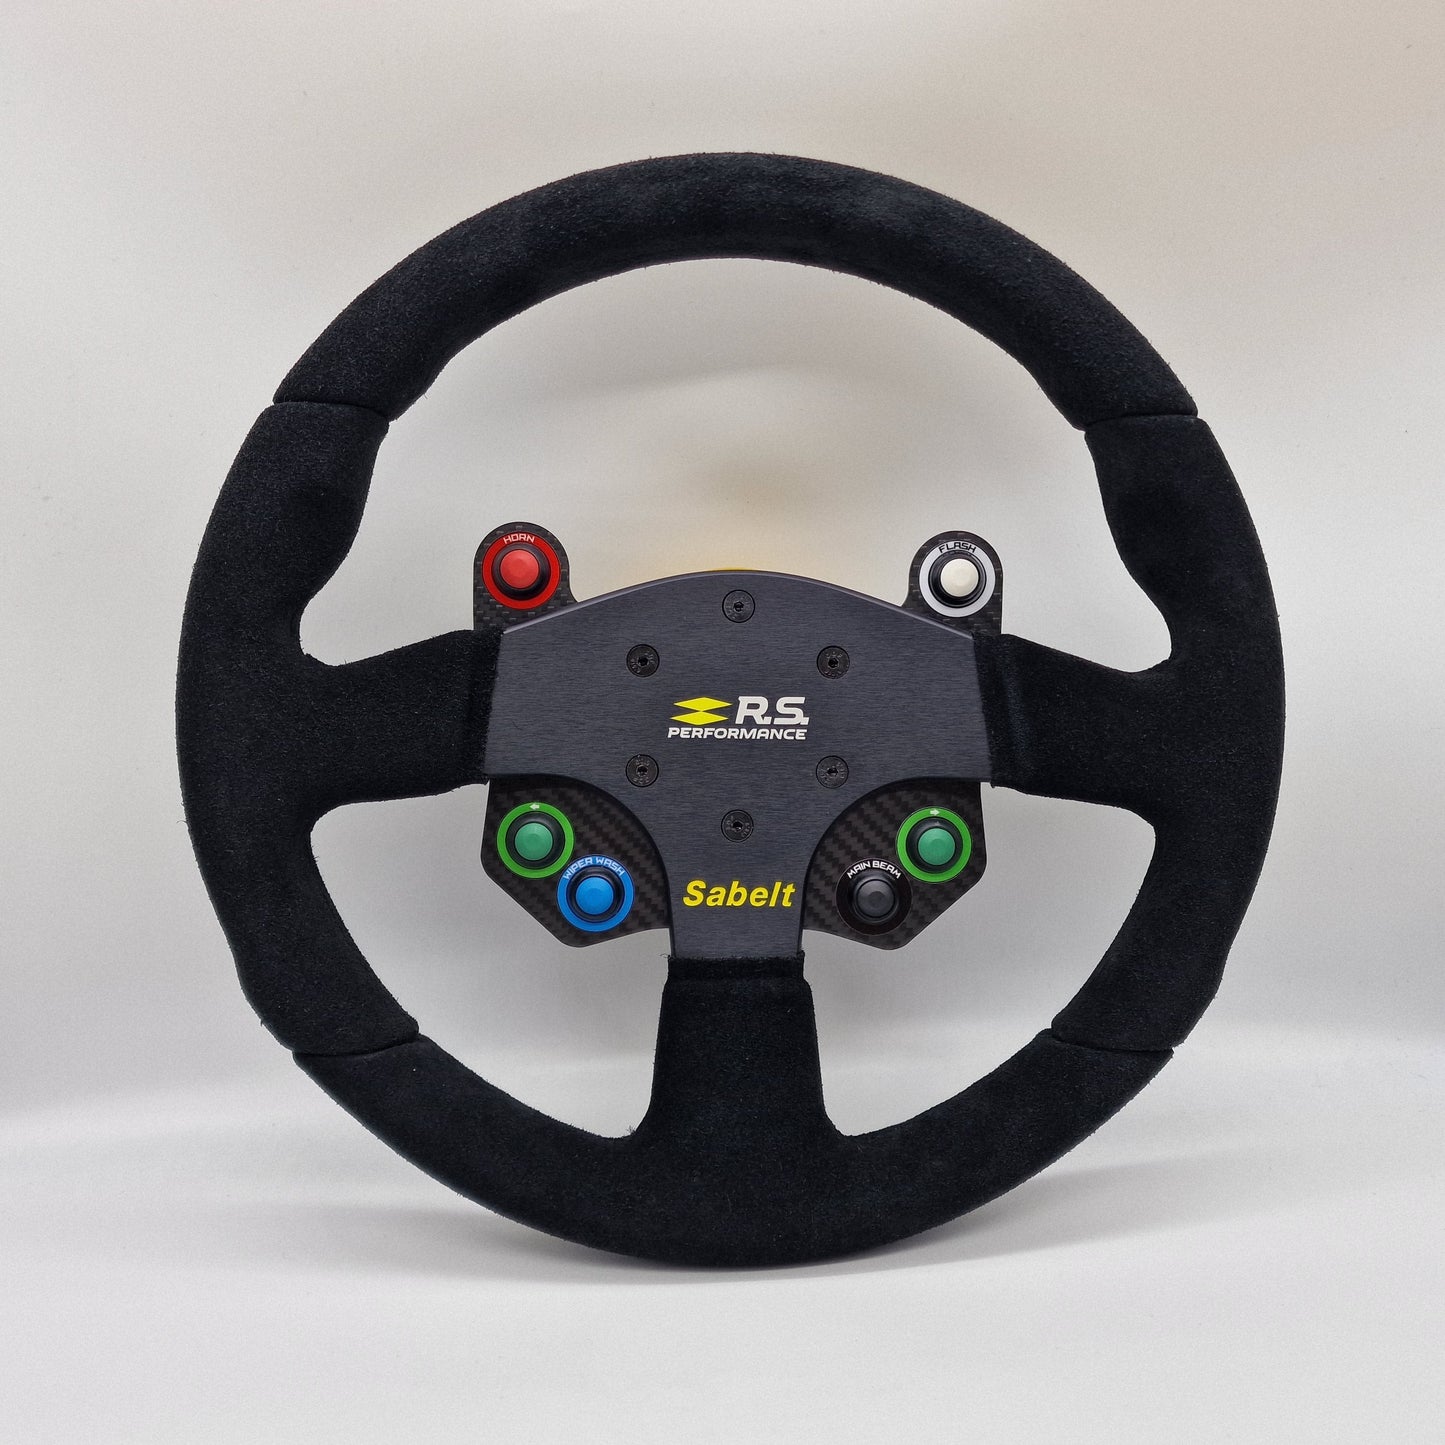 6 Button Wired Race Car Steering Wheel Switch Panel